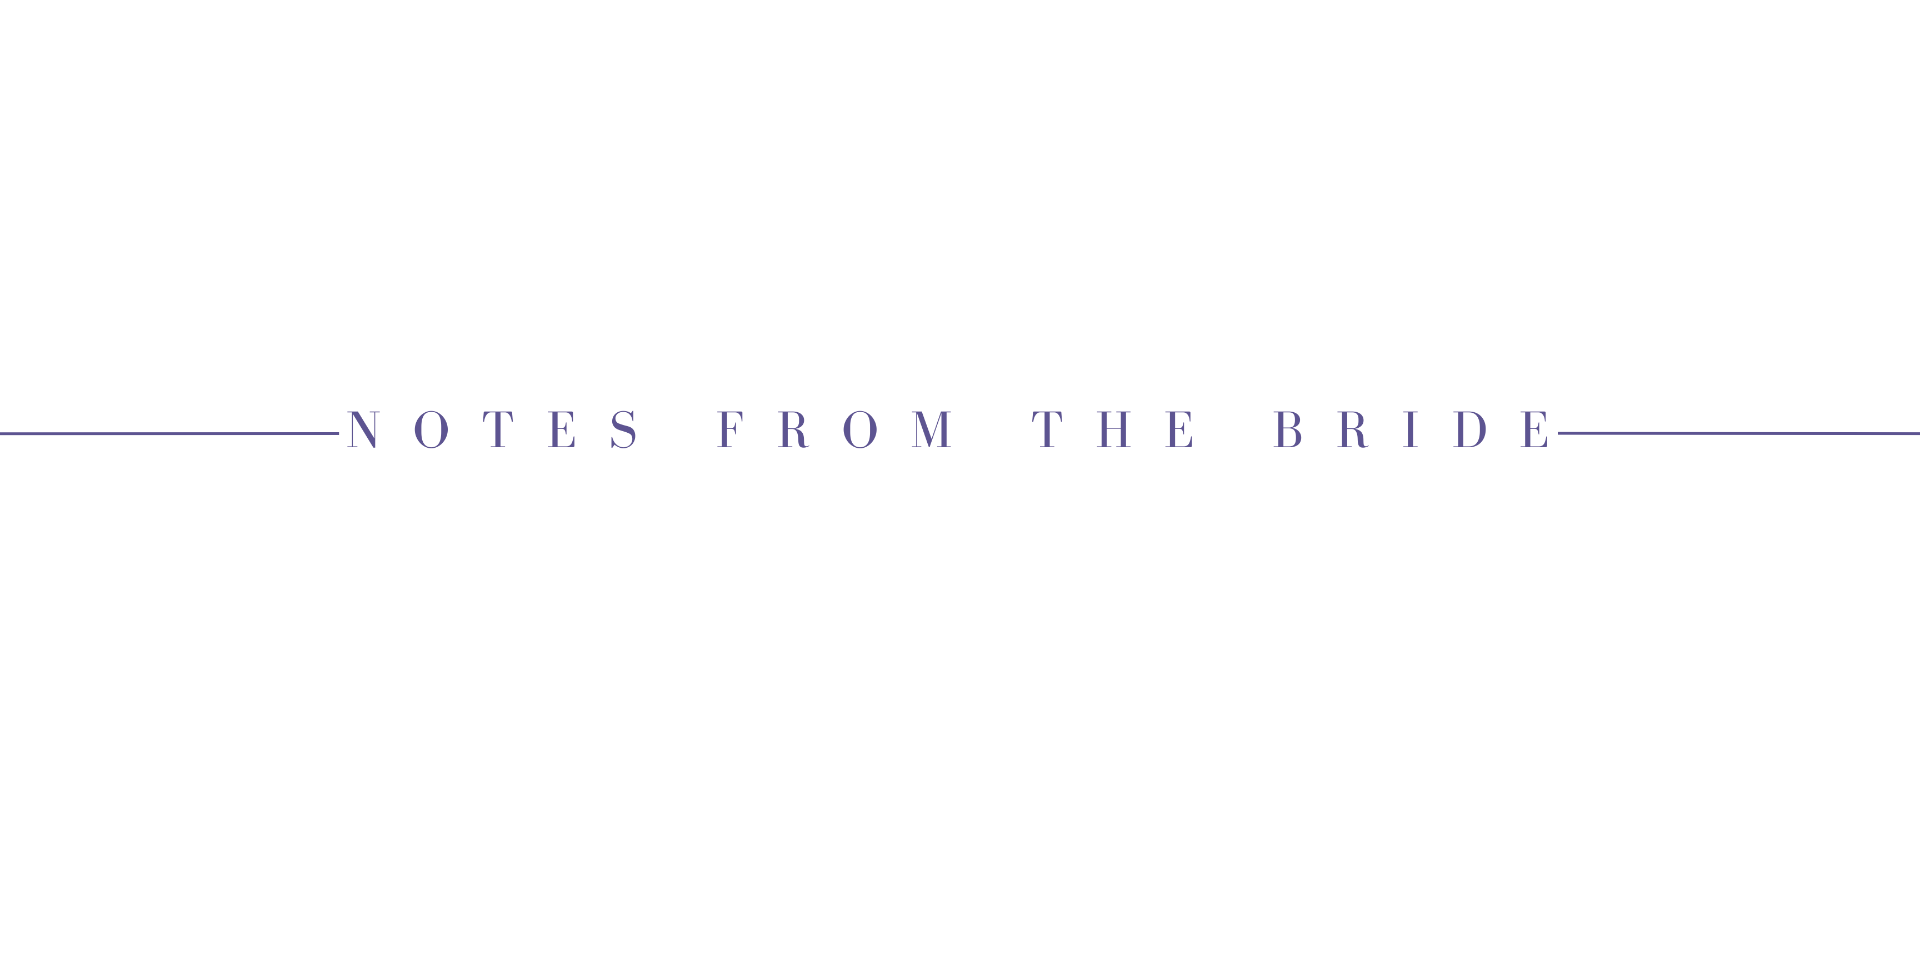 A white background with the words `` notes from the bride '' written on it.